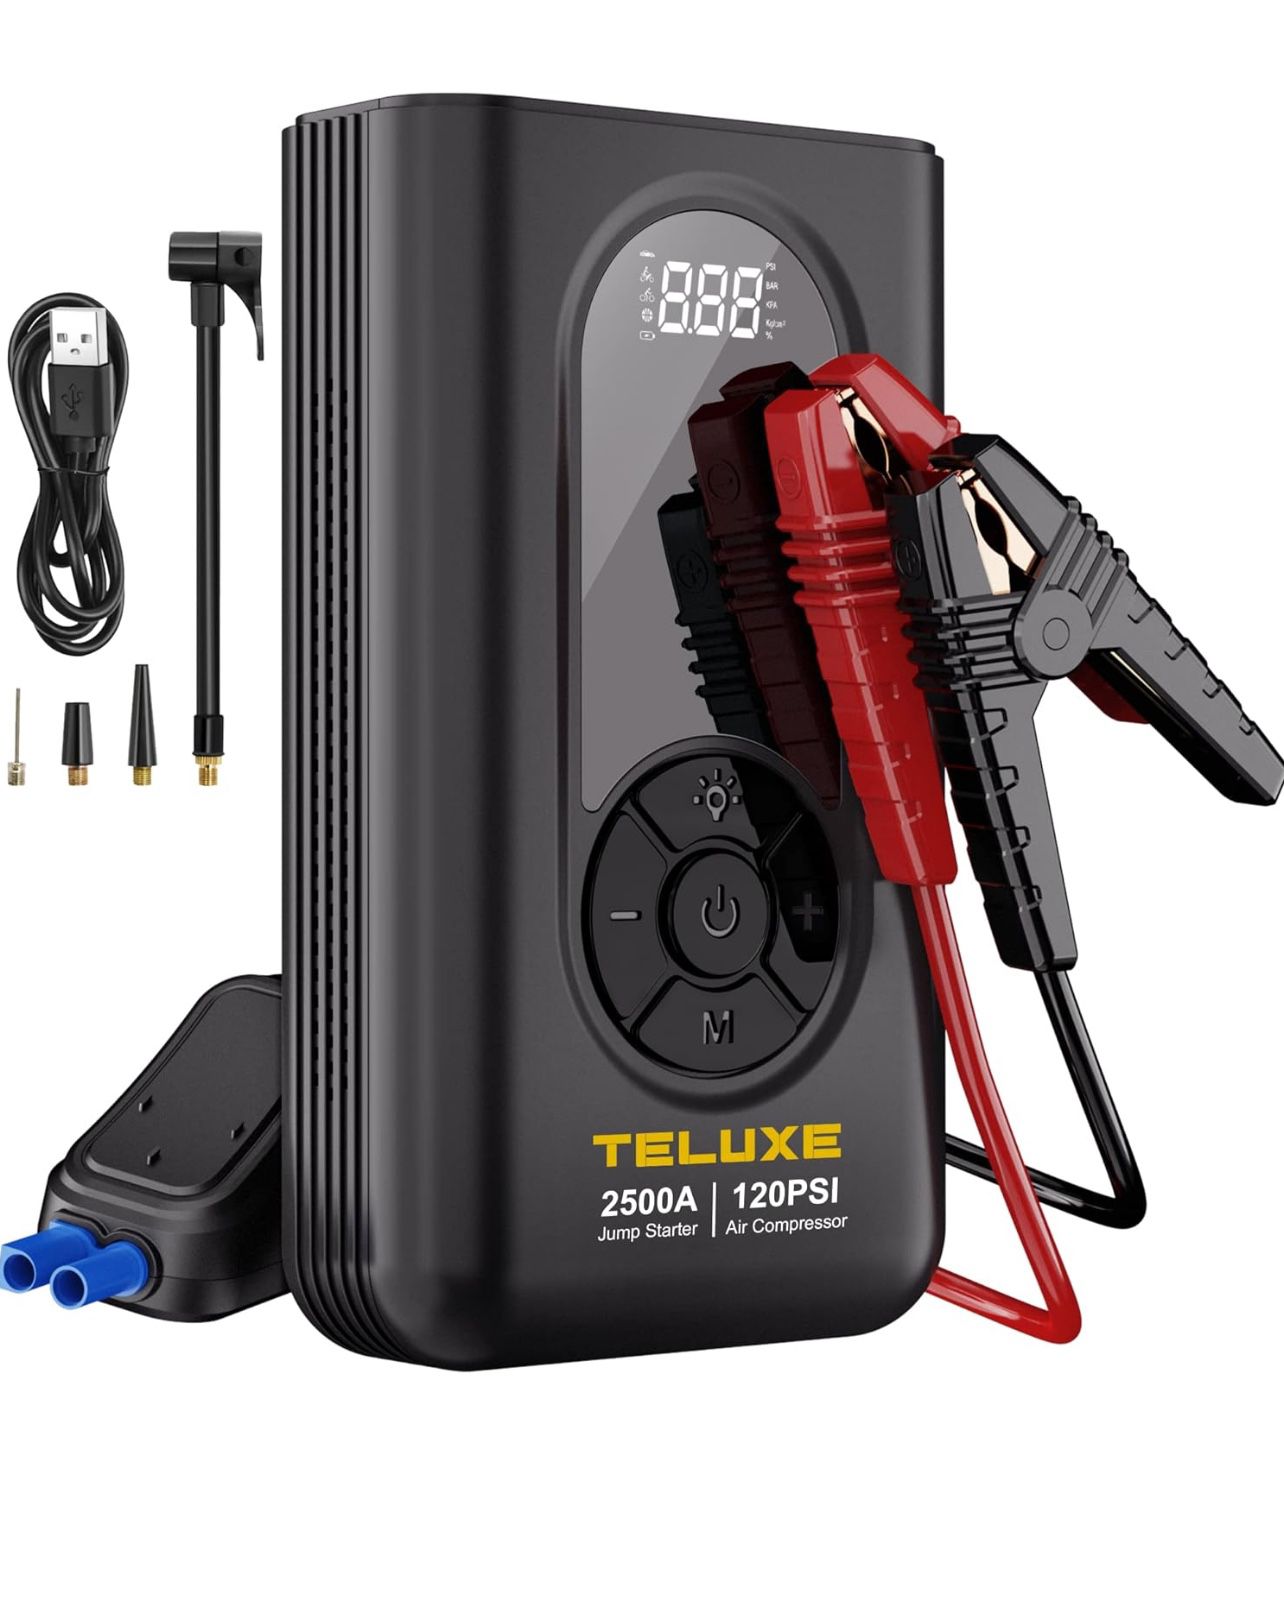 Brandnew Jump Starter with Air Compressor, 2500A 120PSI Car Battery Jump Starter with Digital Tire Inflator, 12V Lithium Jump Box for Vehicles, Batter